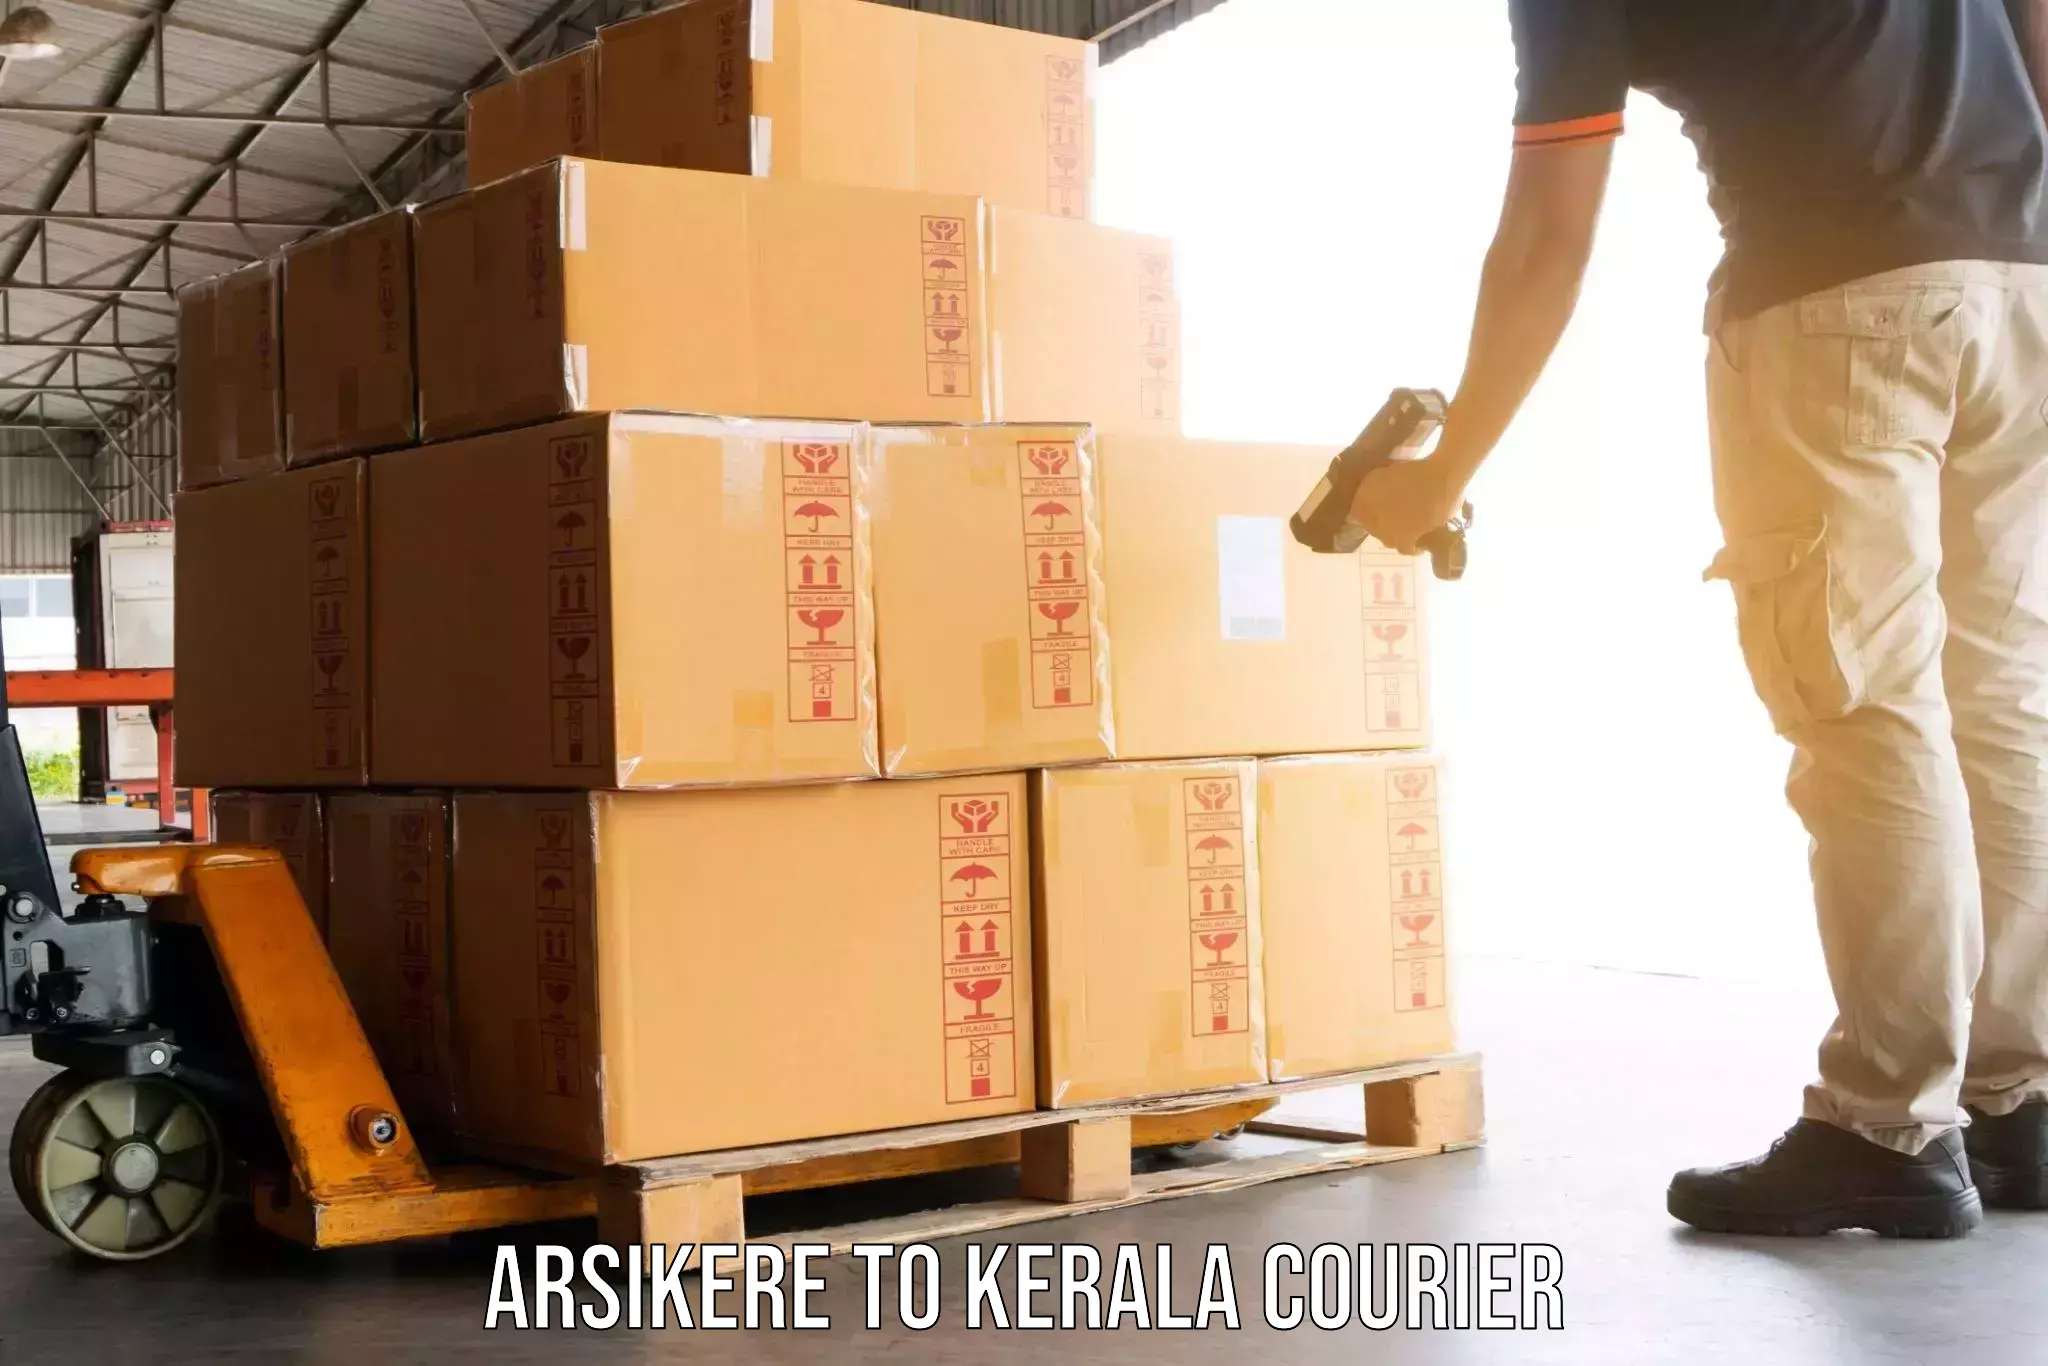 Full-service movers Arsikere to Kerala